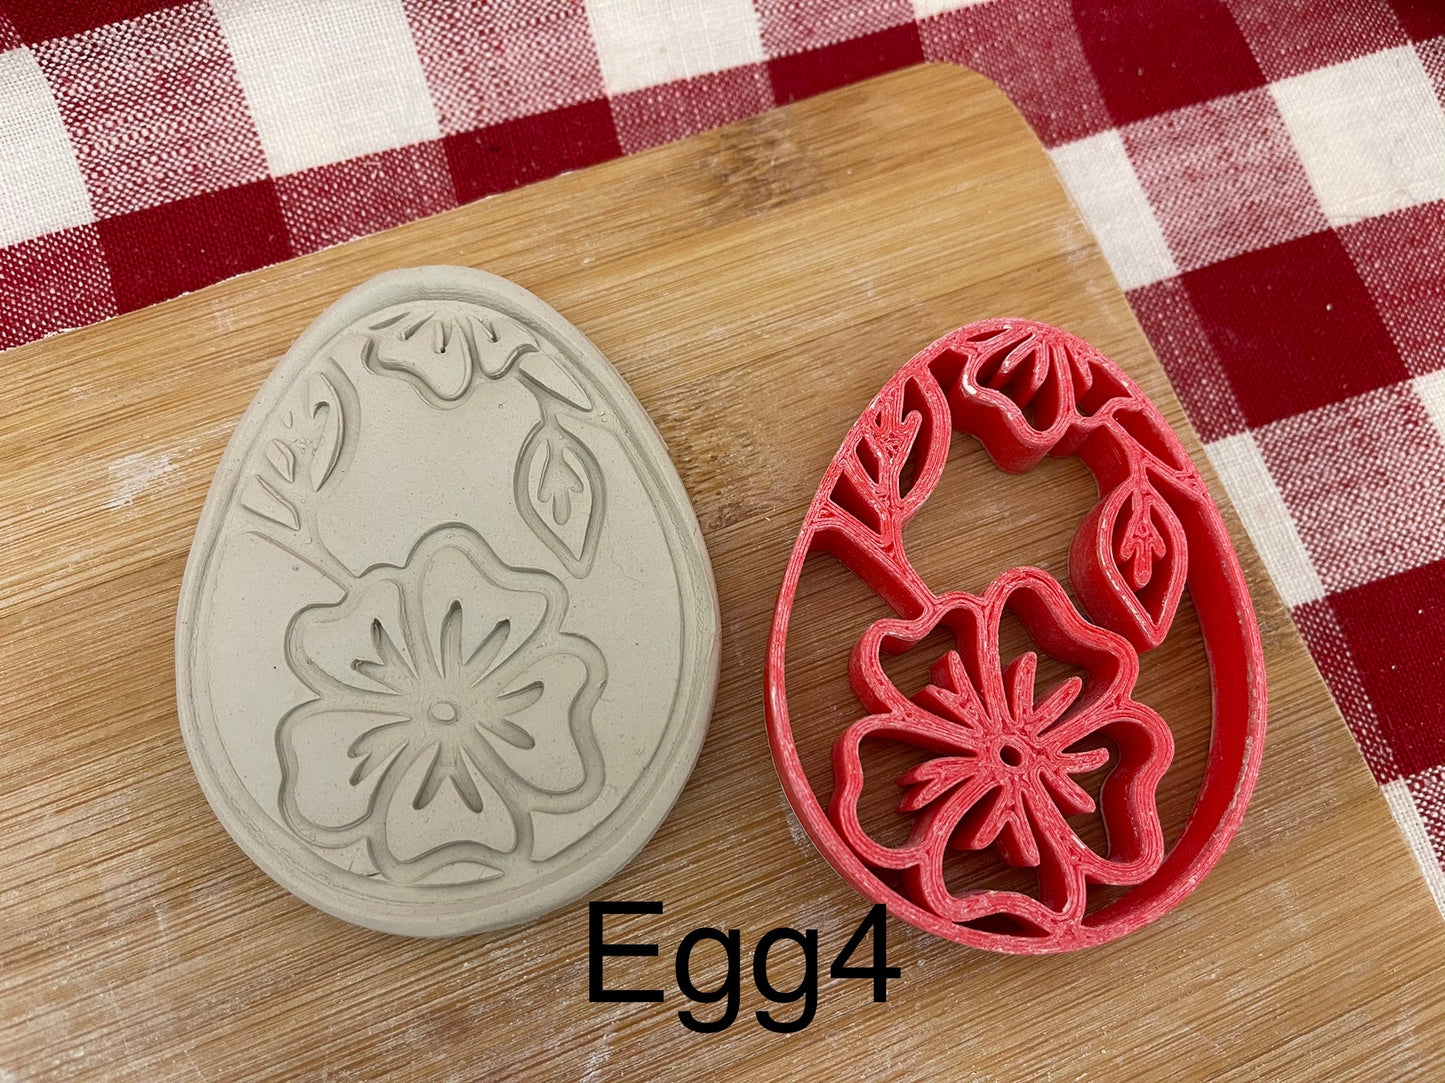 Pottery Stamp, Easter egg designs, with optional cookie cutter ornament - multiple sizes